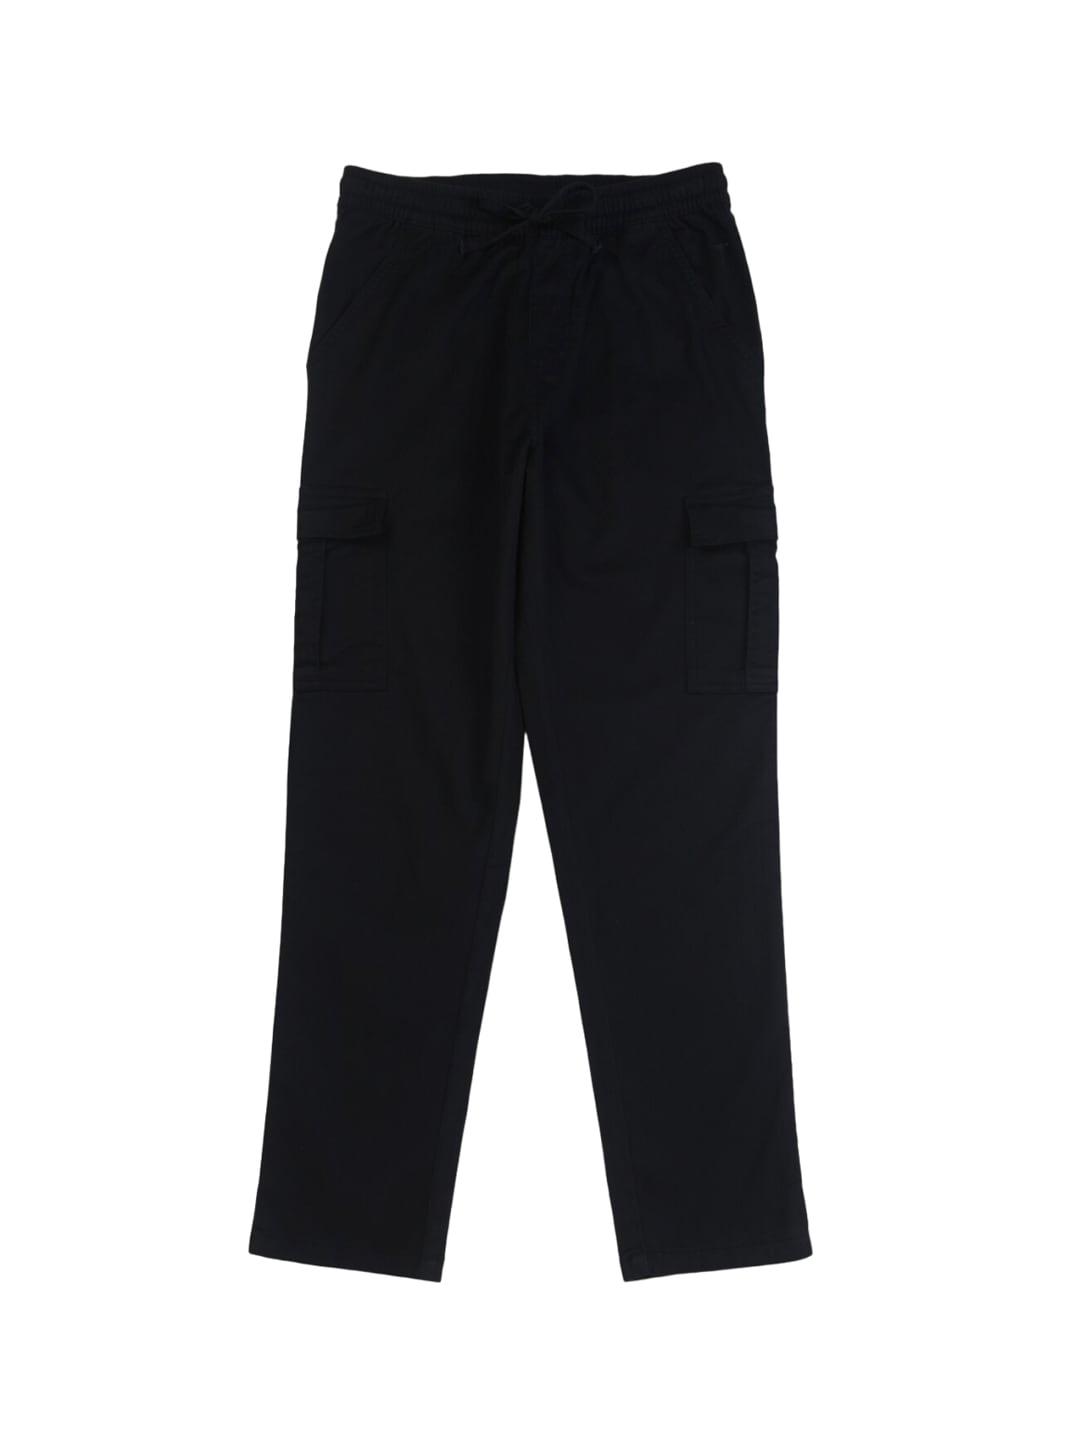 Palm Tree Boys Mid-Rise Cotton Cargos Trousers